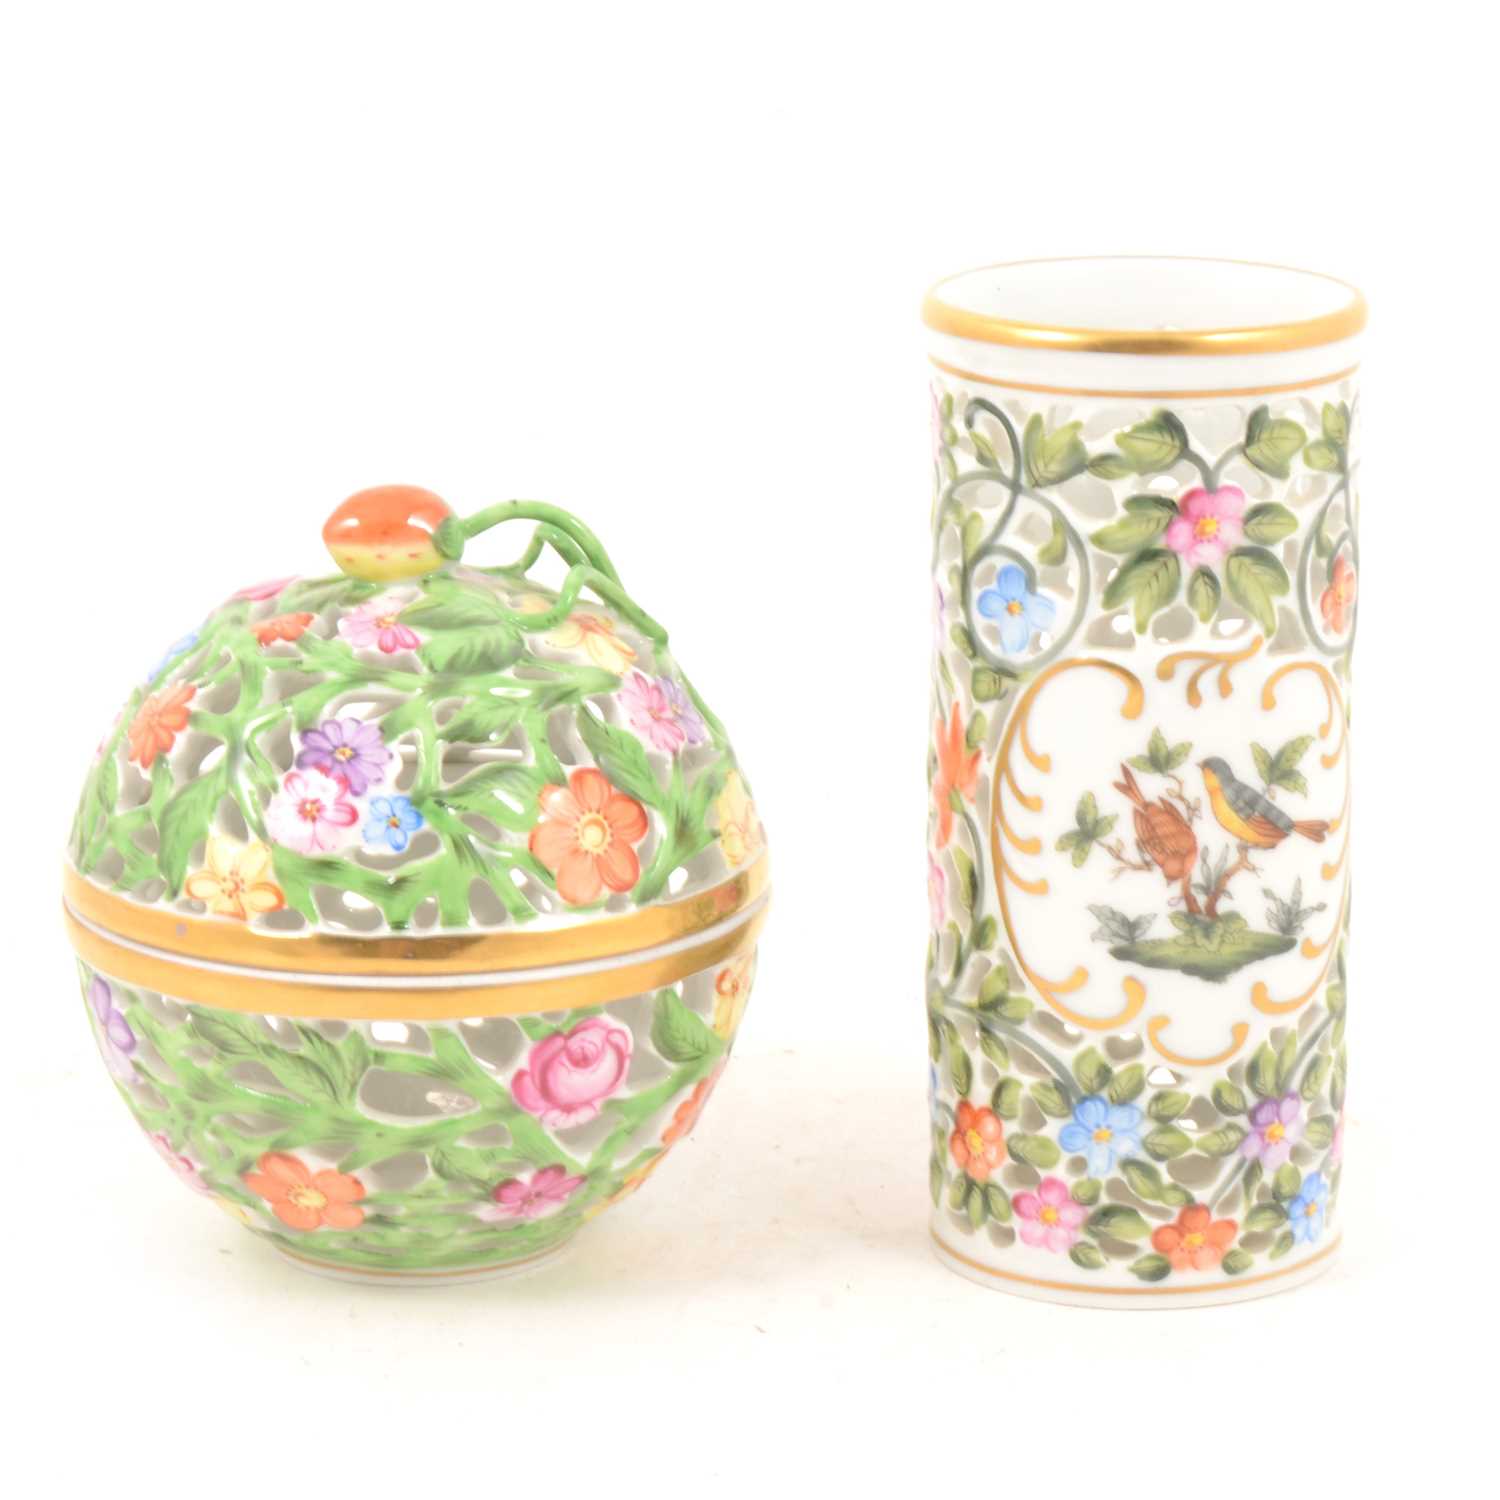 Lot 87 - Two Herend, Hungary, hand-painted porcelain pierced vases.